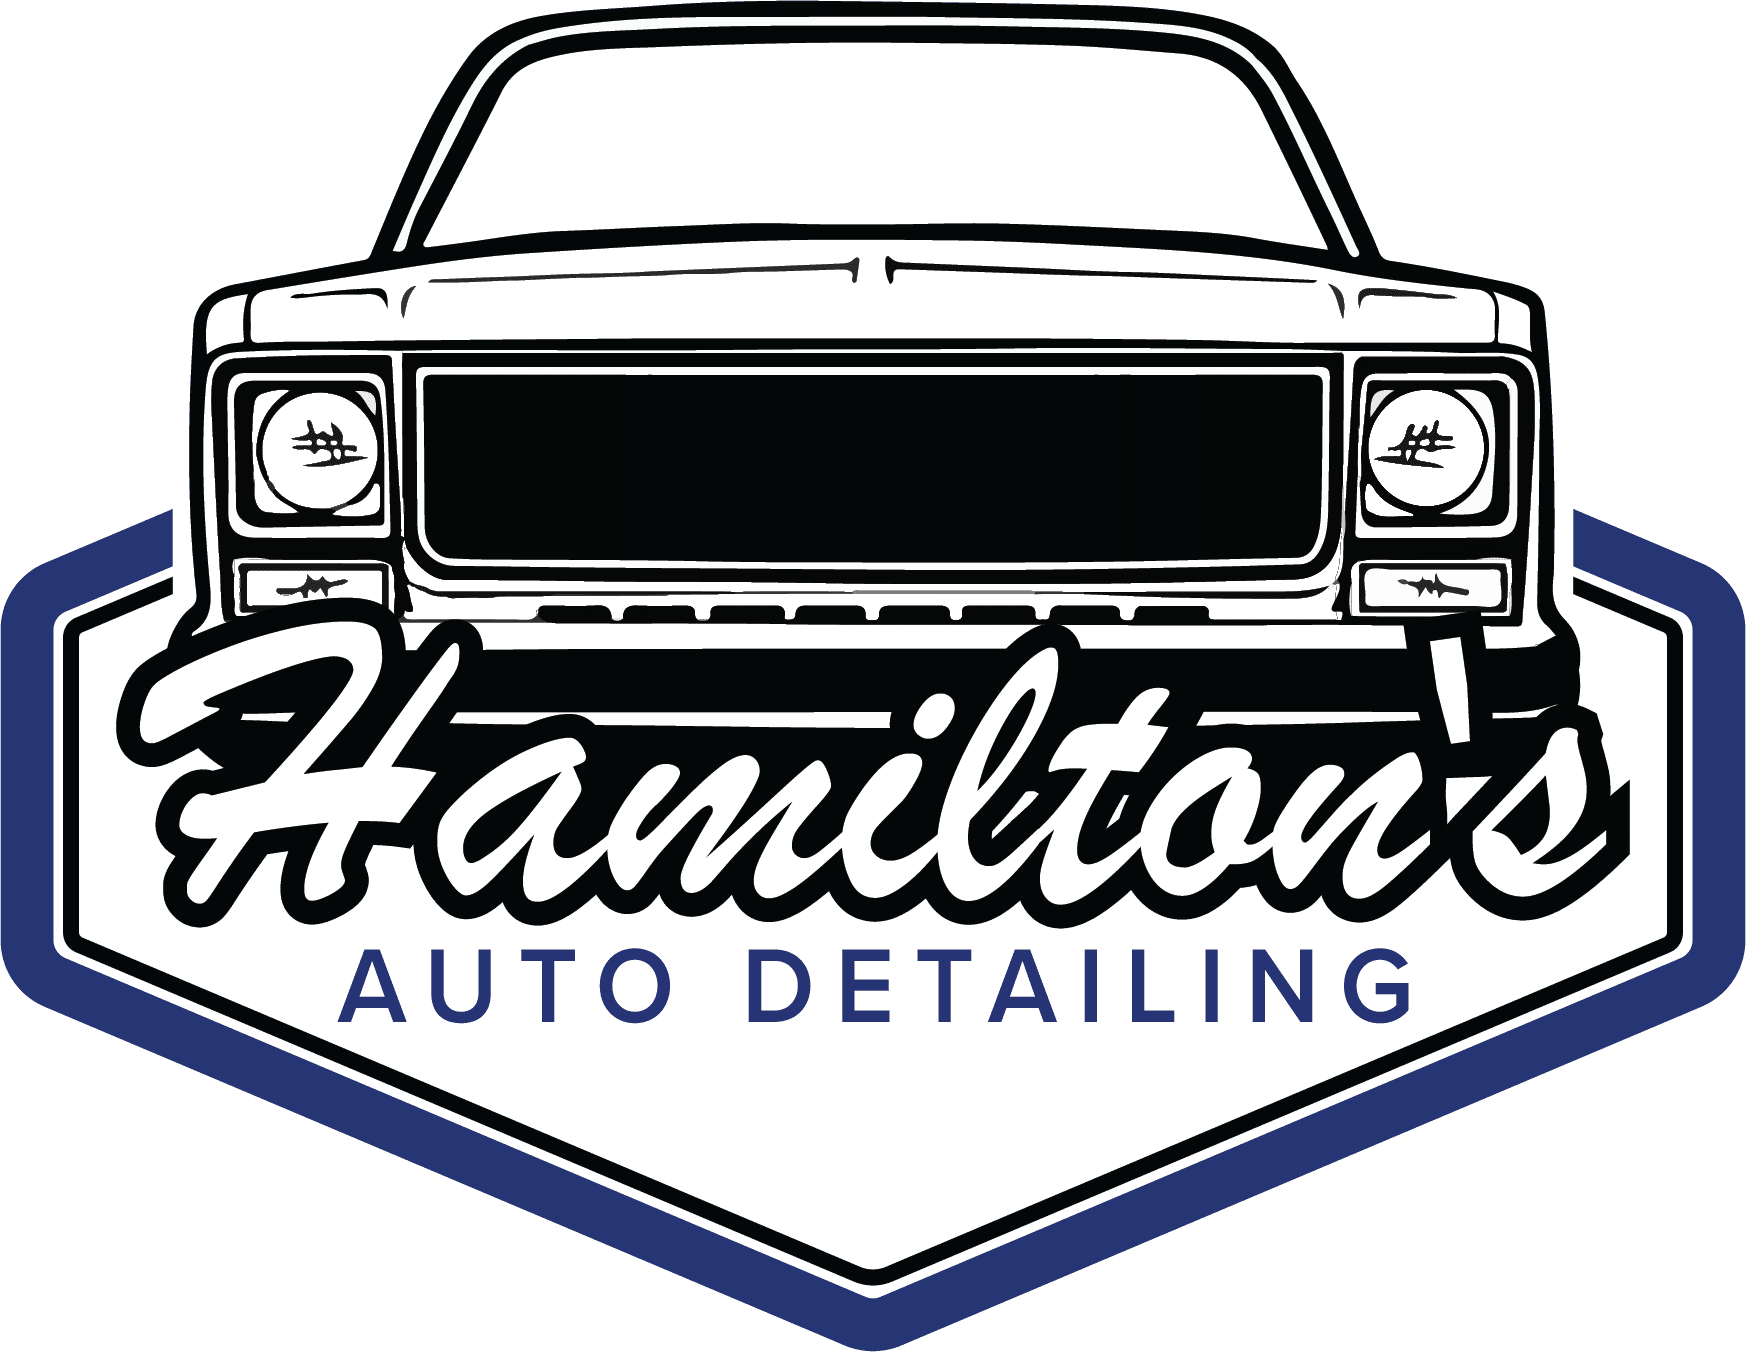 A picture of the logo for hamilton 's auto detailing.